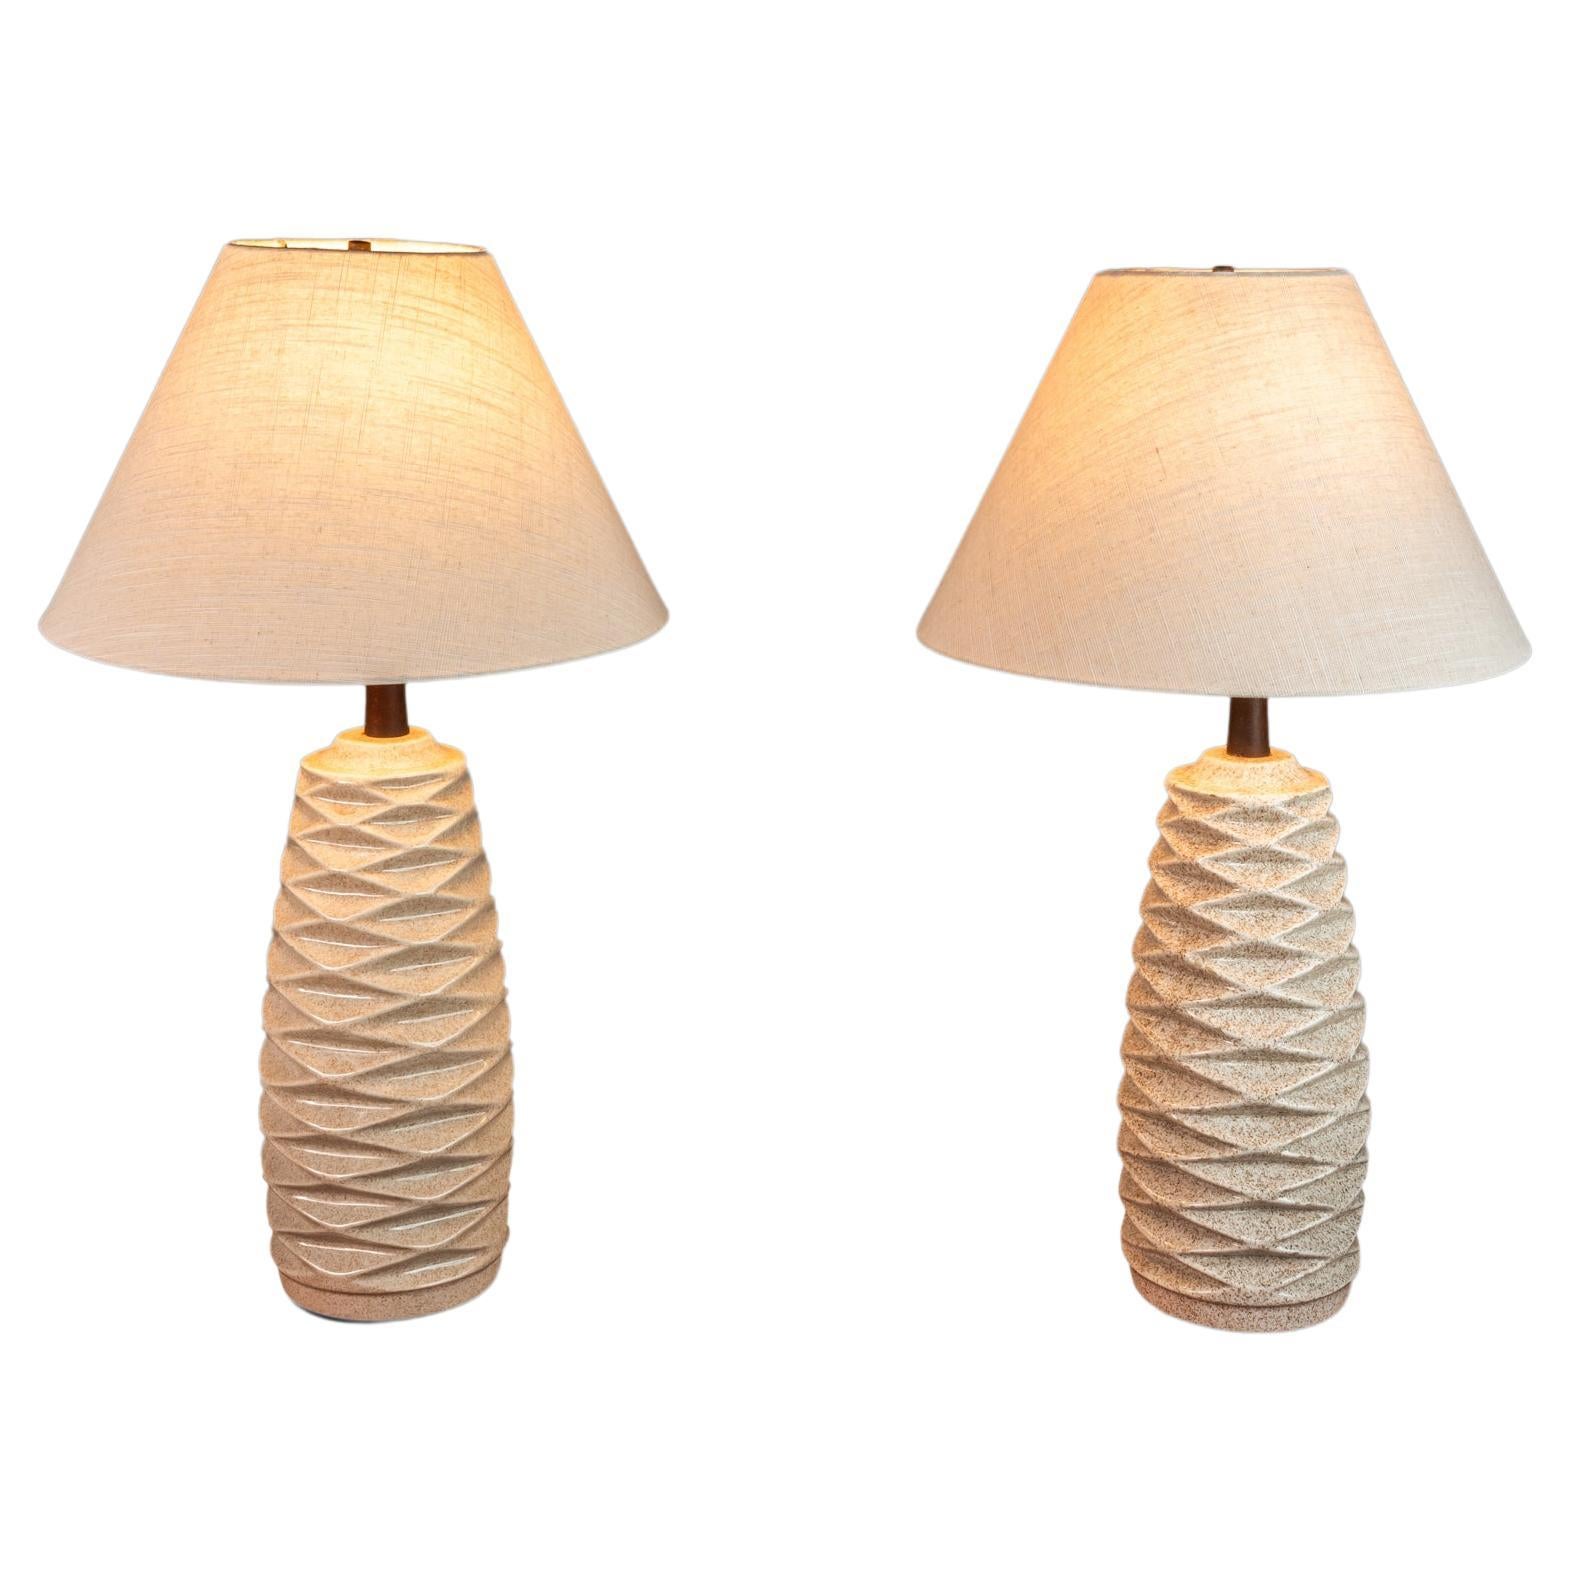 Set of Two ( 2 ) Mid-Century Modern Ceramic Table Lamps w/ Walnut Necks, 1960's For Sale